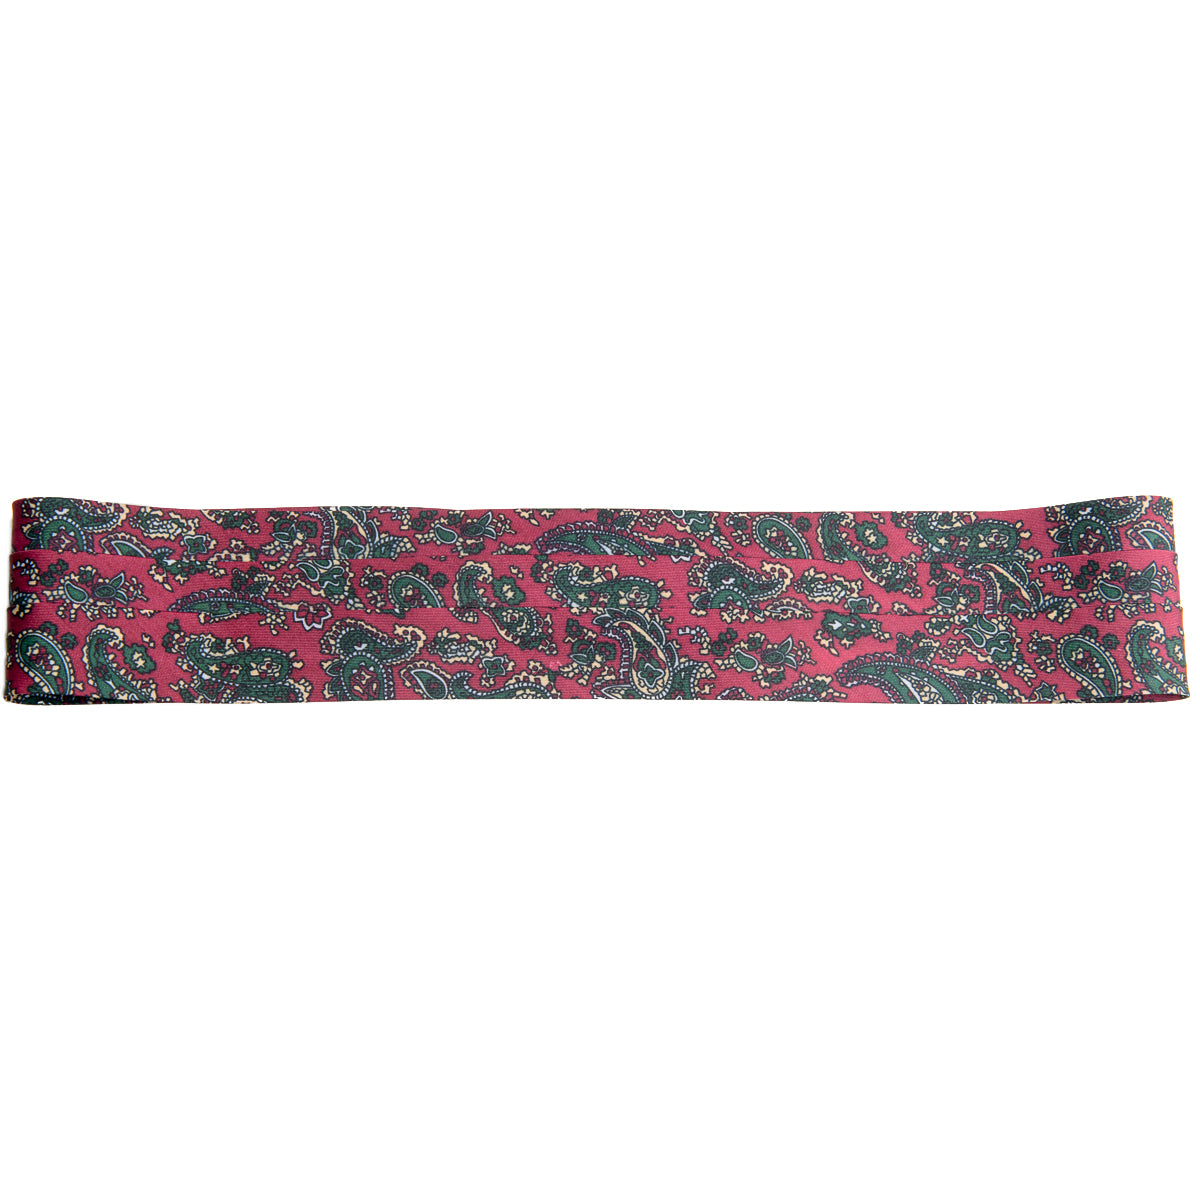 puggaree ~ 3 pleat ~ red/green paisley